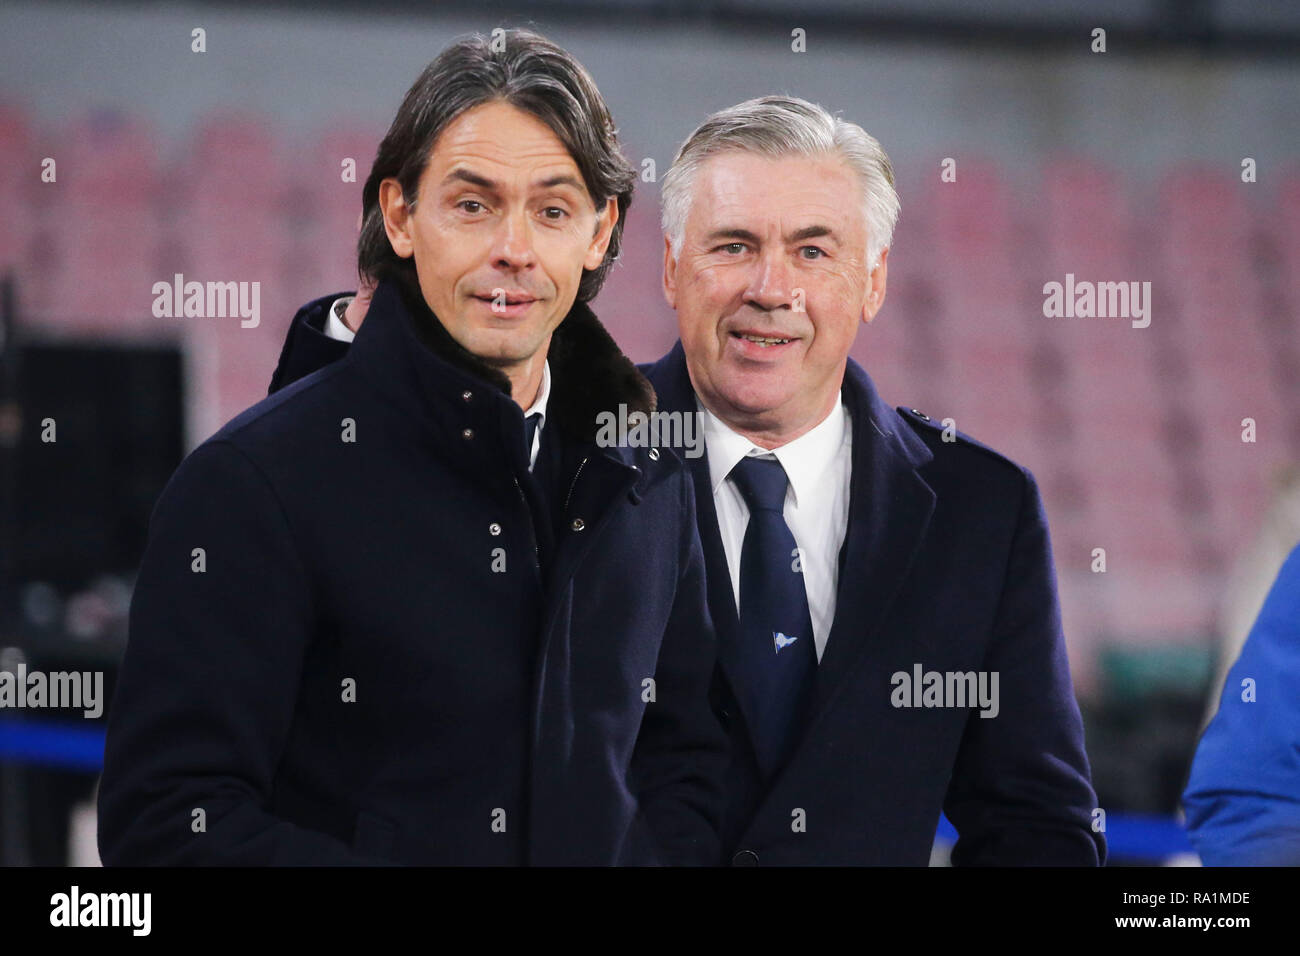 Napoli, Campania, Italy, 29-12-18, Serie A football match SSC Napoli - Bologna at the San Paolo Stadium in picture Filippo Inzaghi (L) coach of the Bo Stock Photo